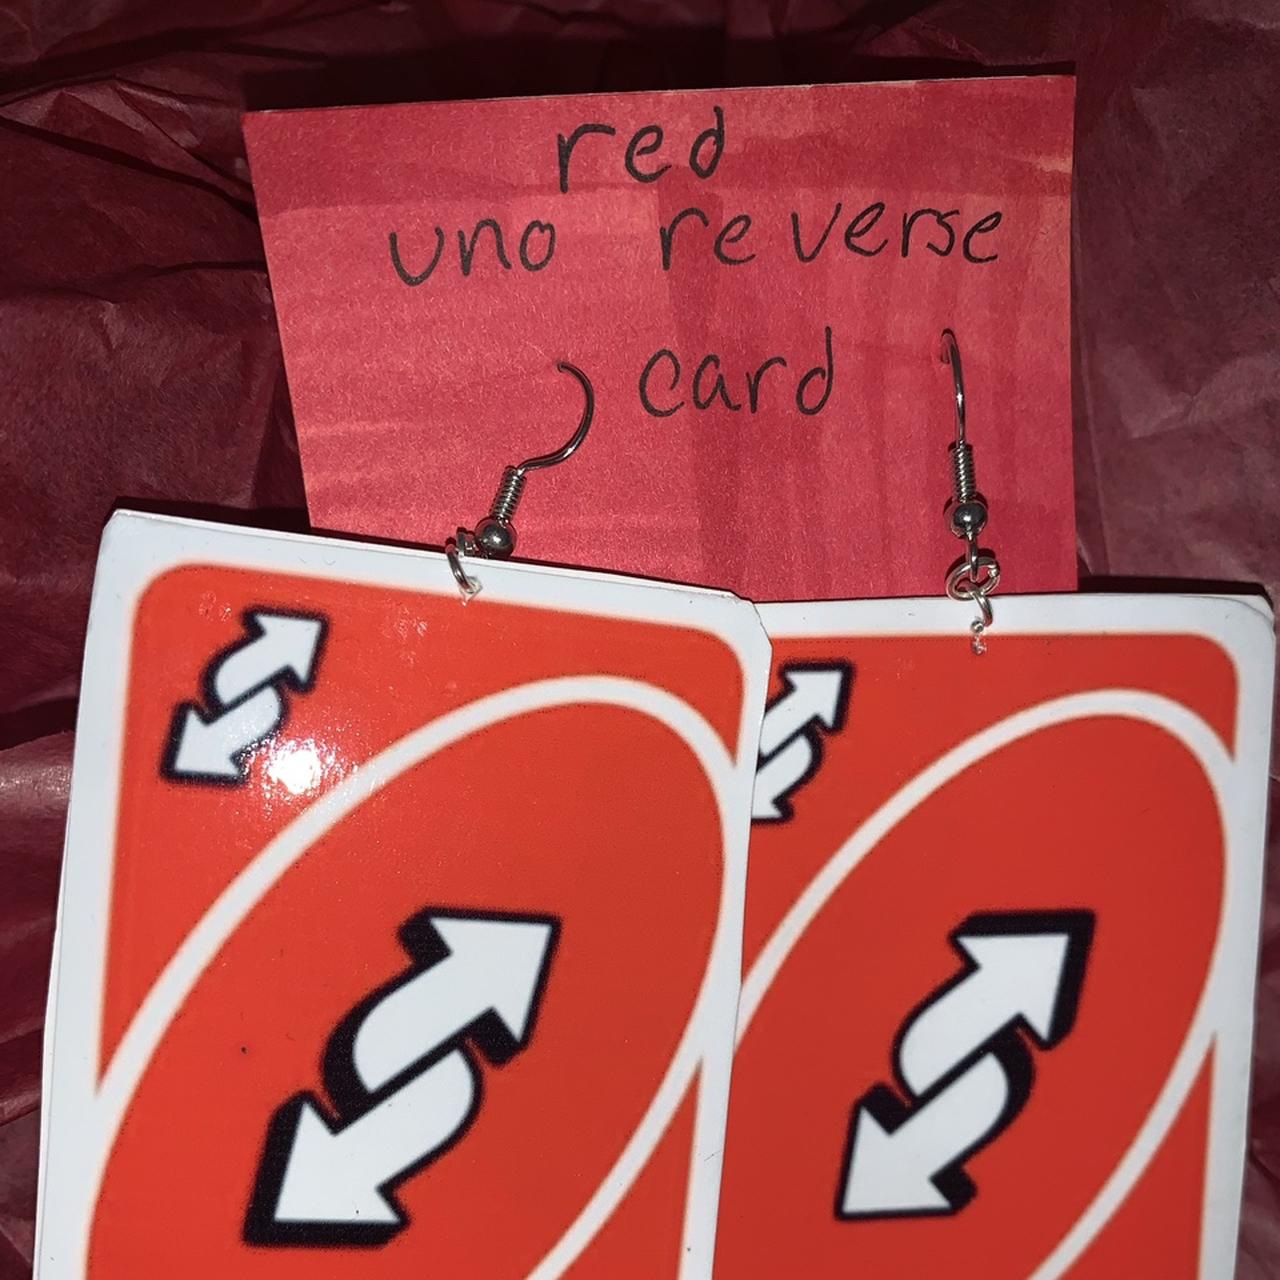 Red Uno Reverse Card 